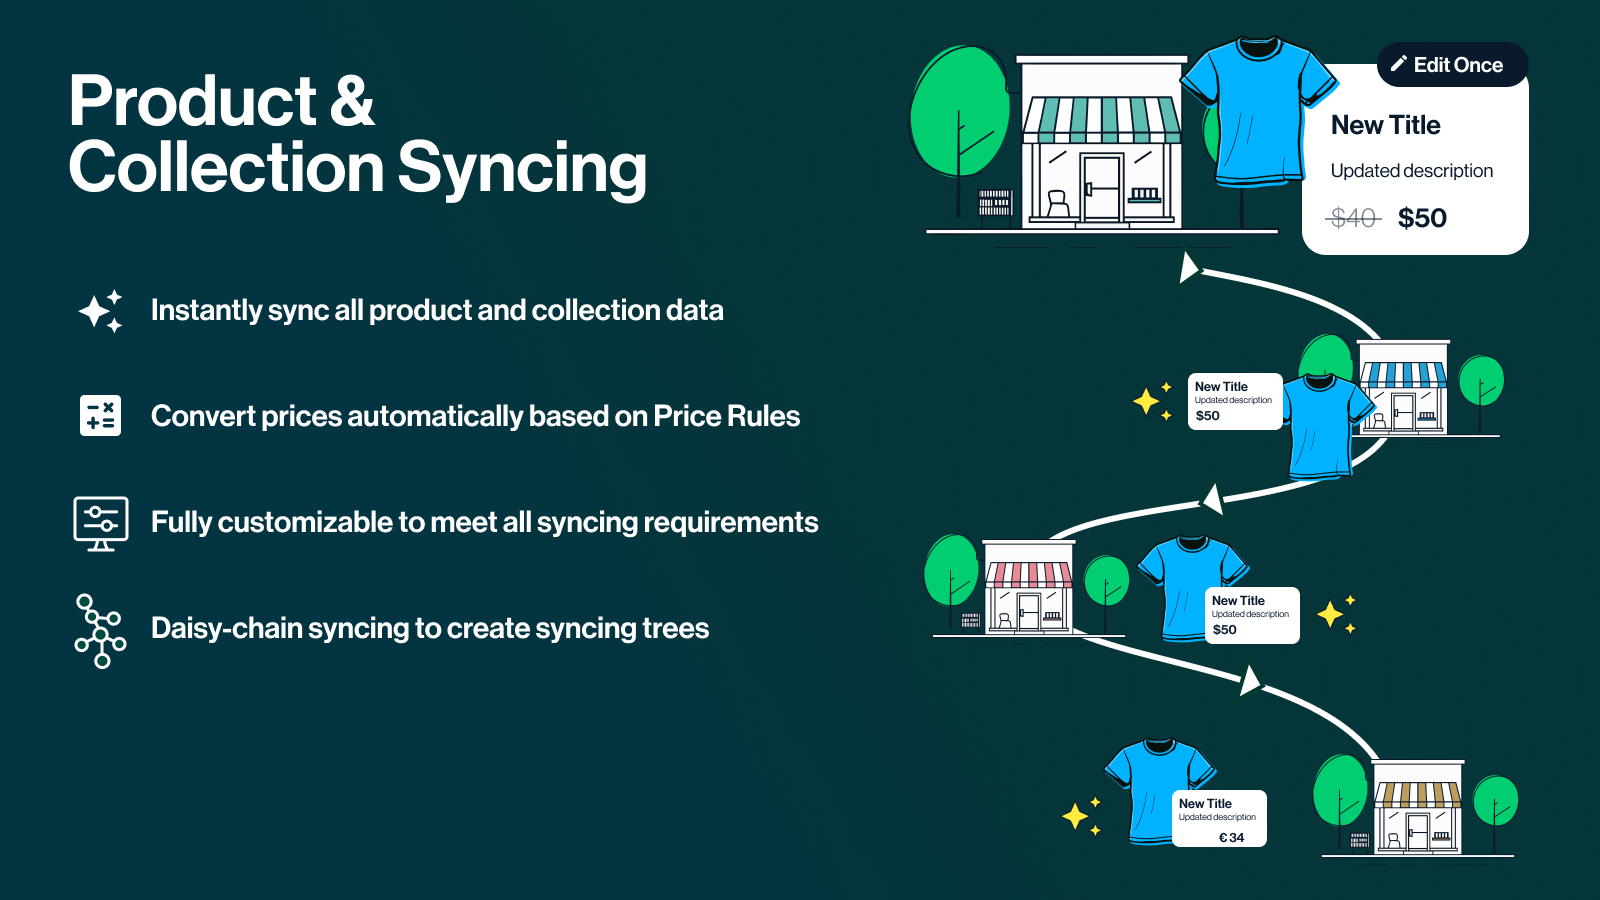 Keep all product data in sync with optional price conversions